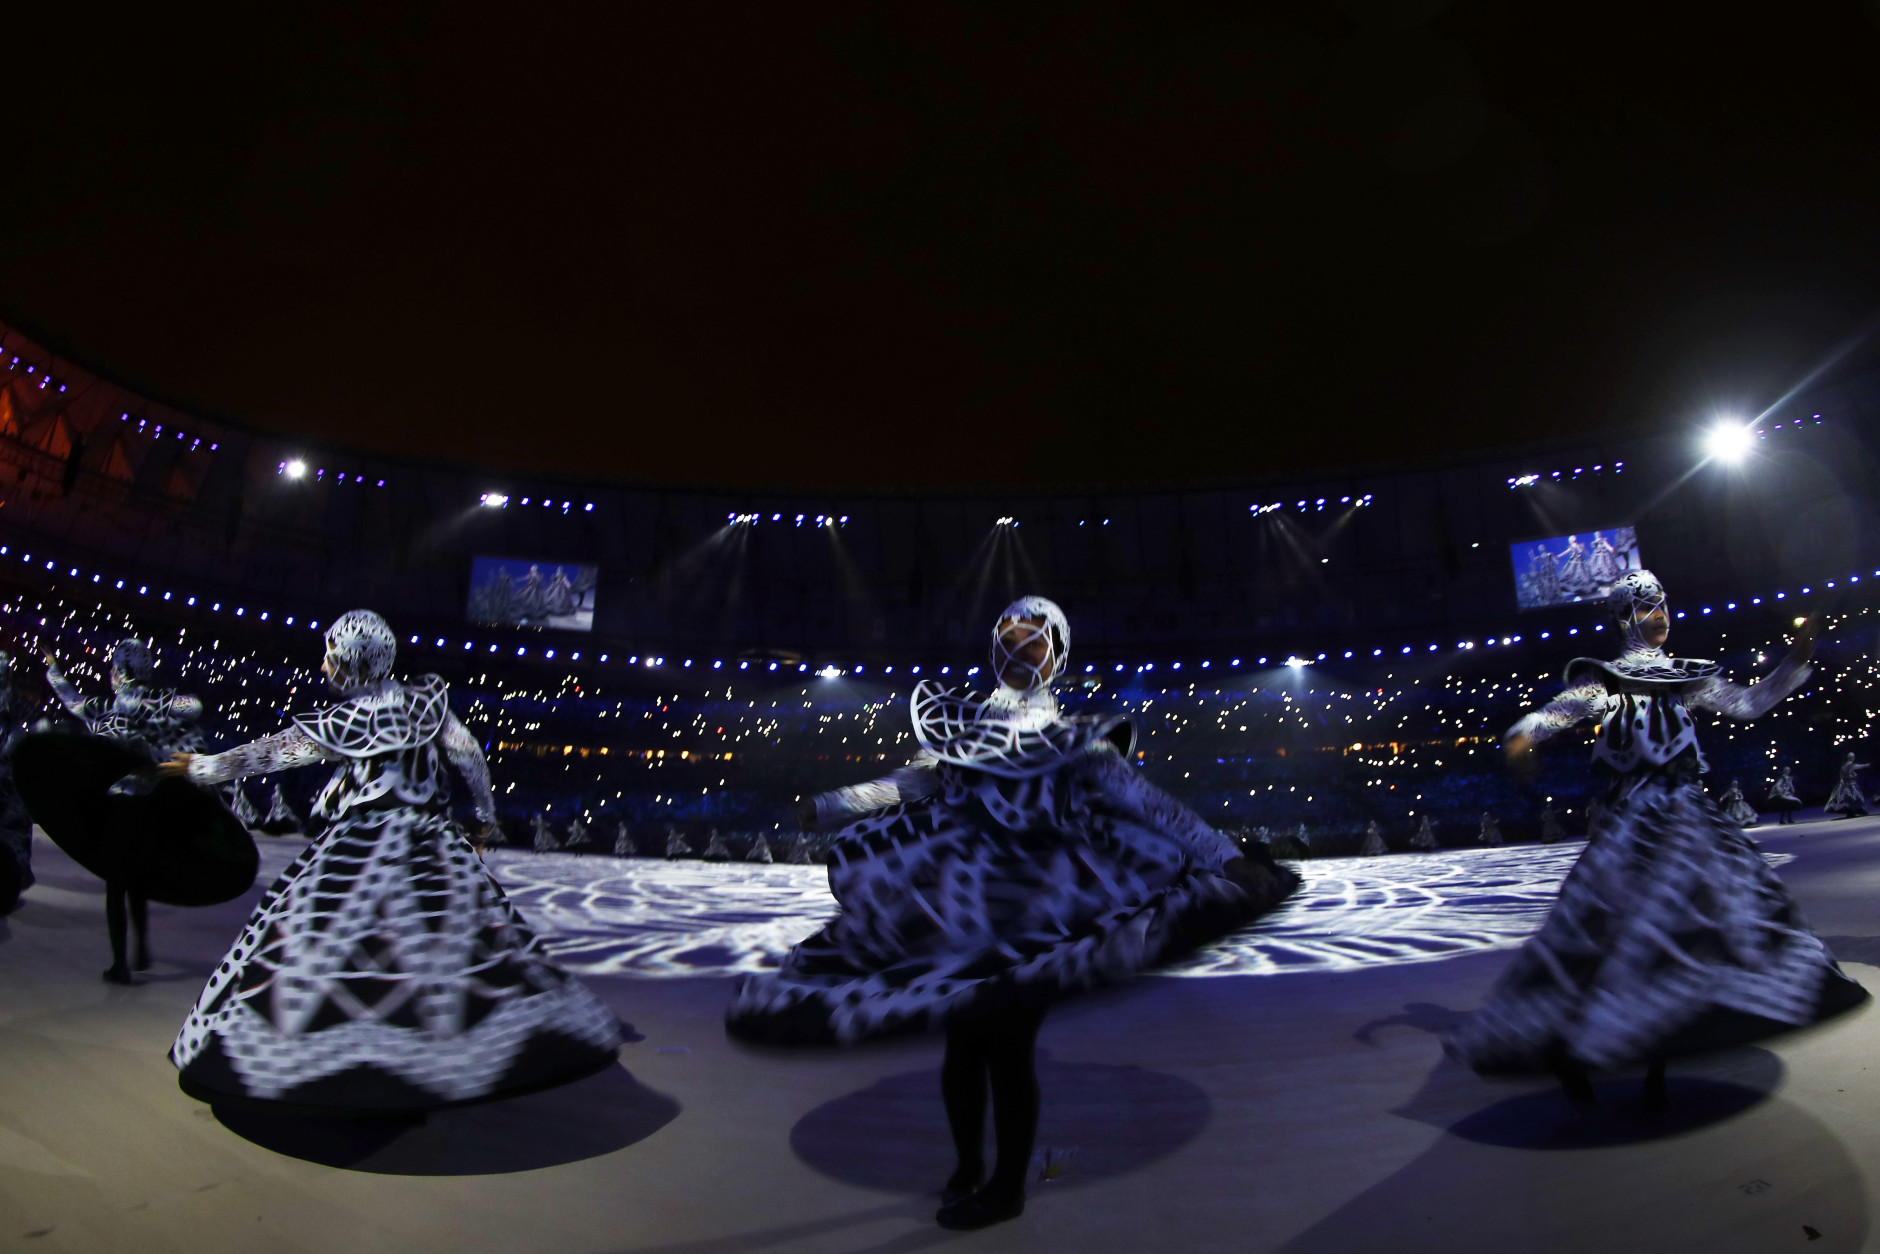 RIO DE JANEIRO, BRAZIL - AUGUST 21:  Dancers perform during the 'Lace Making' segment of the Closing Ceremony on Day 16 of the Rio 2016 Olympic Games at Maracana Stadium on August 21, 2016 in Rio de Janeiro, Brazil.  (Photo by Ezra Shaw/Getty Images)